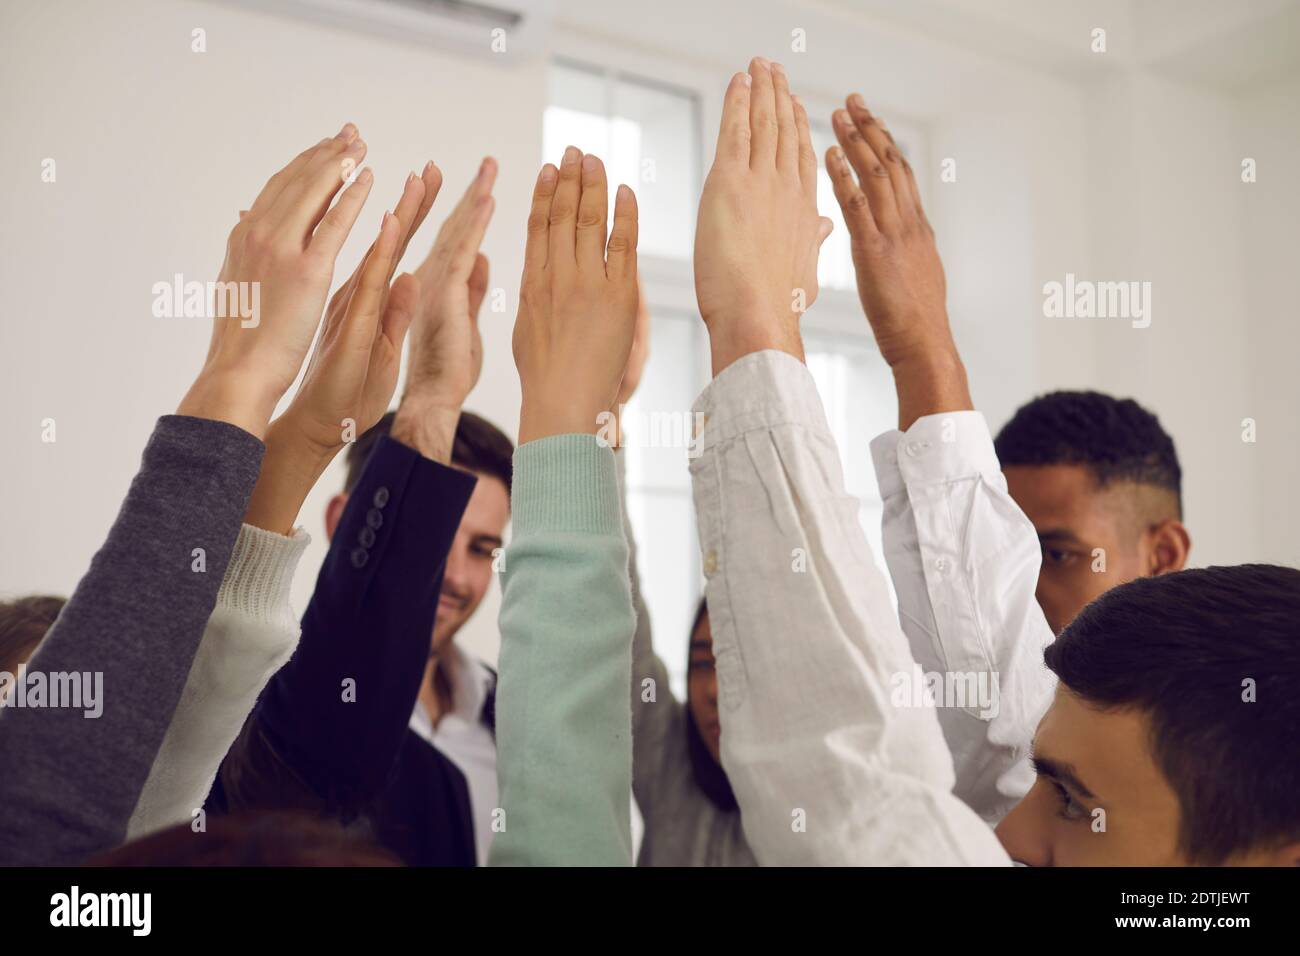 Team of young people raising hands up in the air, voting for good idea or showing solidarity Stock Photo